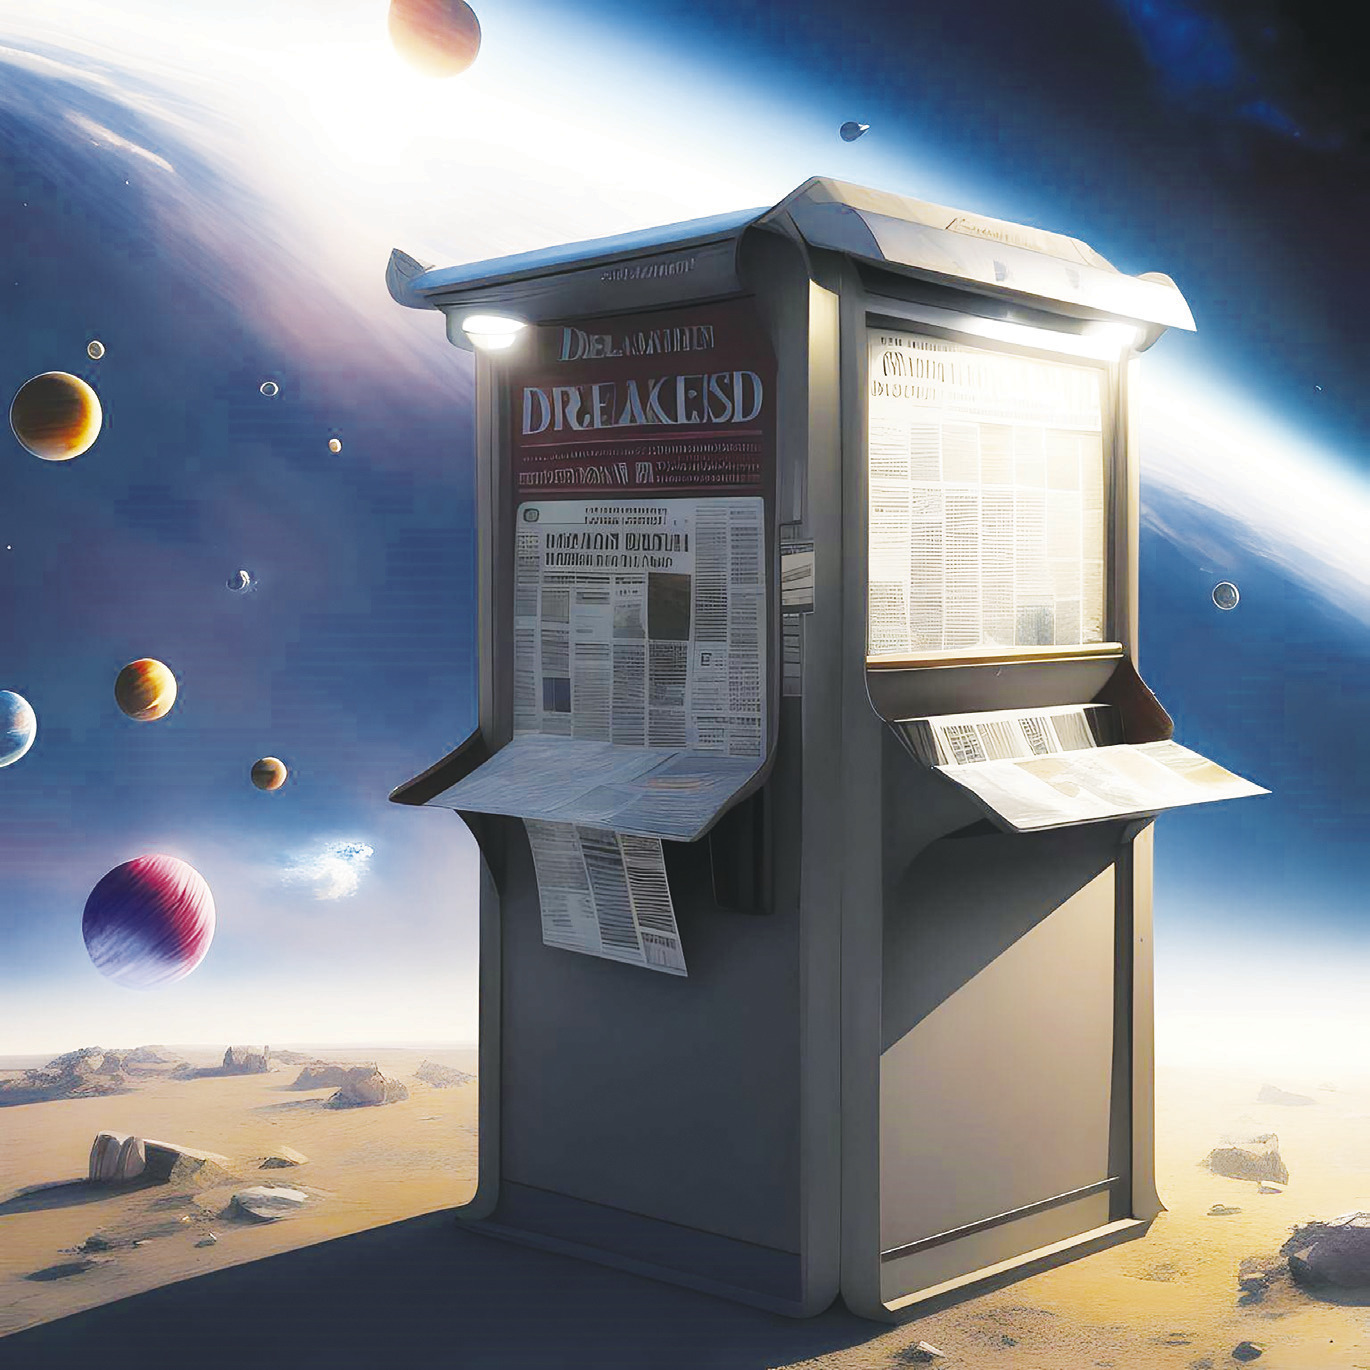 ◄ An Artificial Intelligence image generator designed this picture when it was asked to make a “newspaper stand in space.” Provided